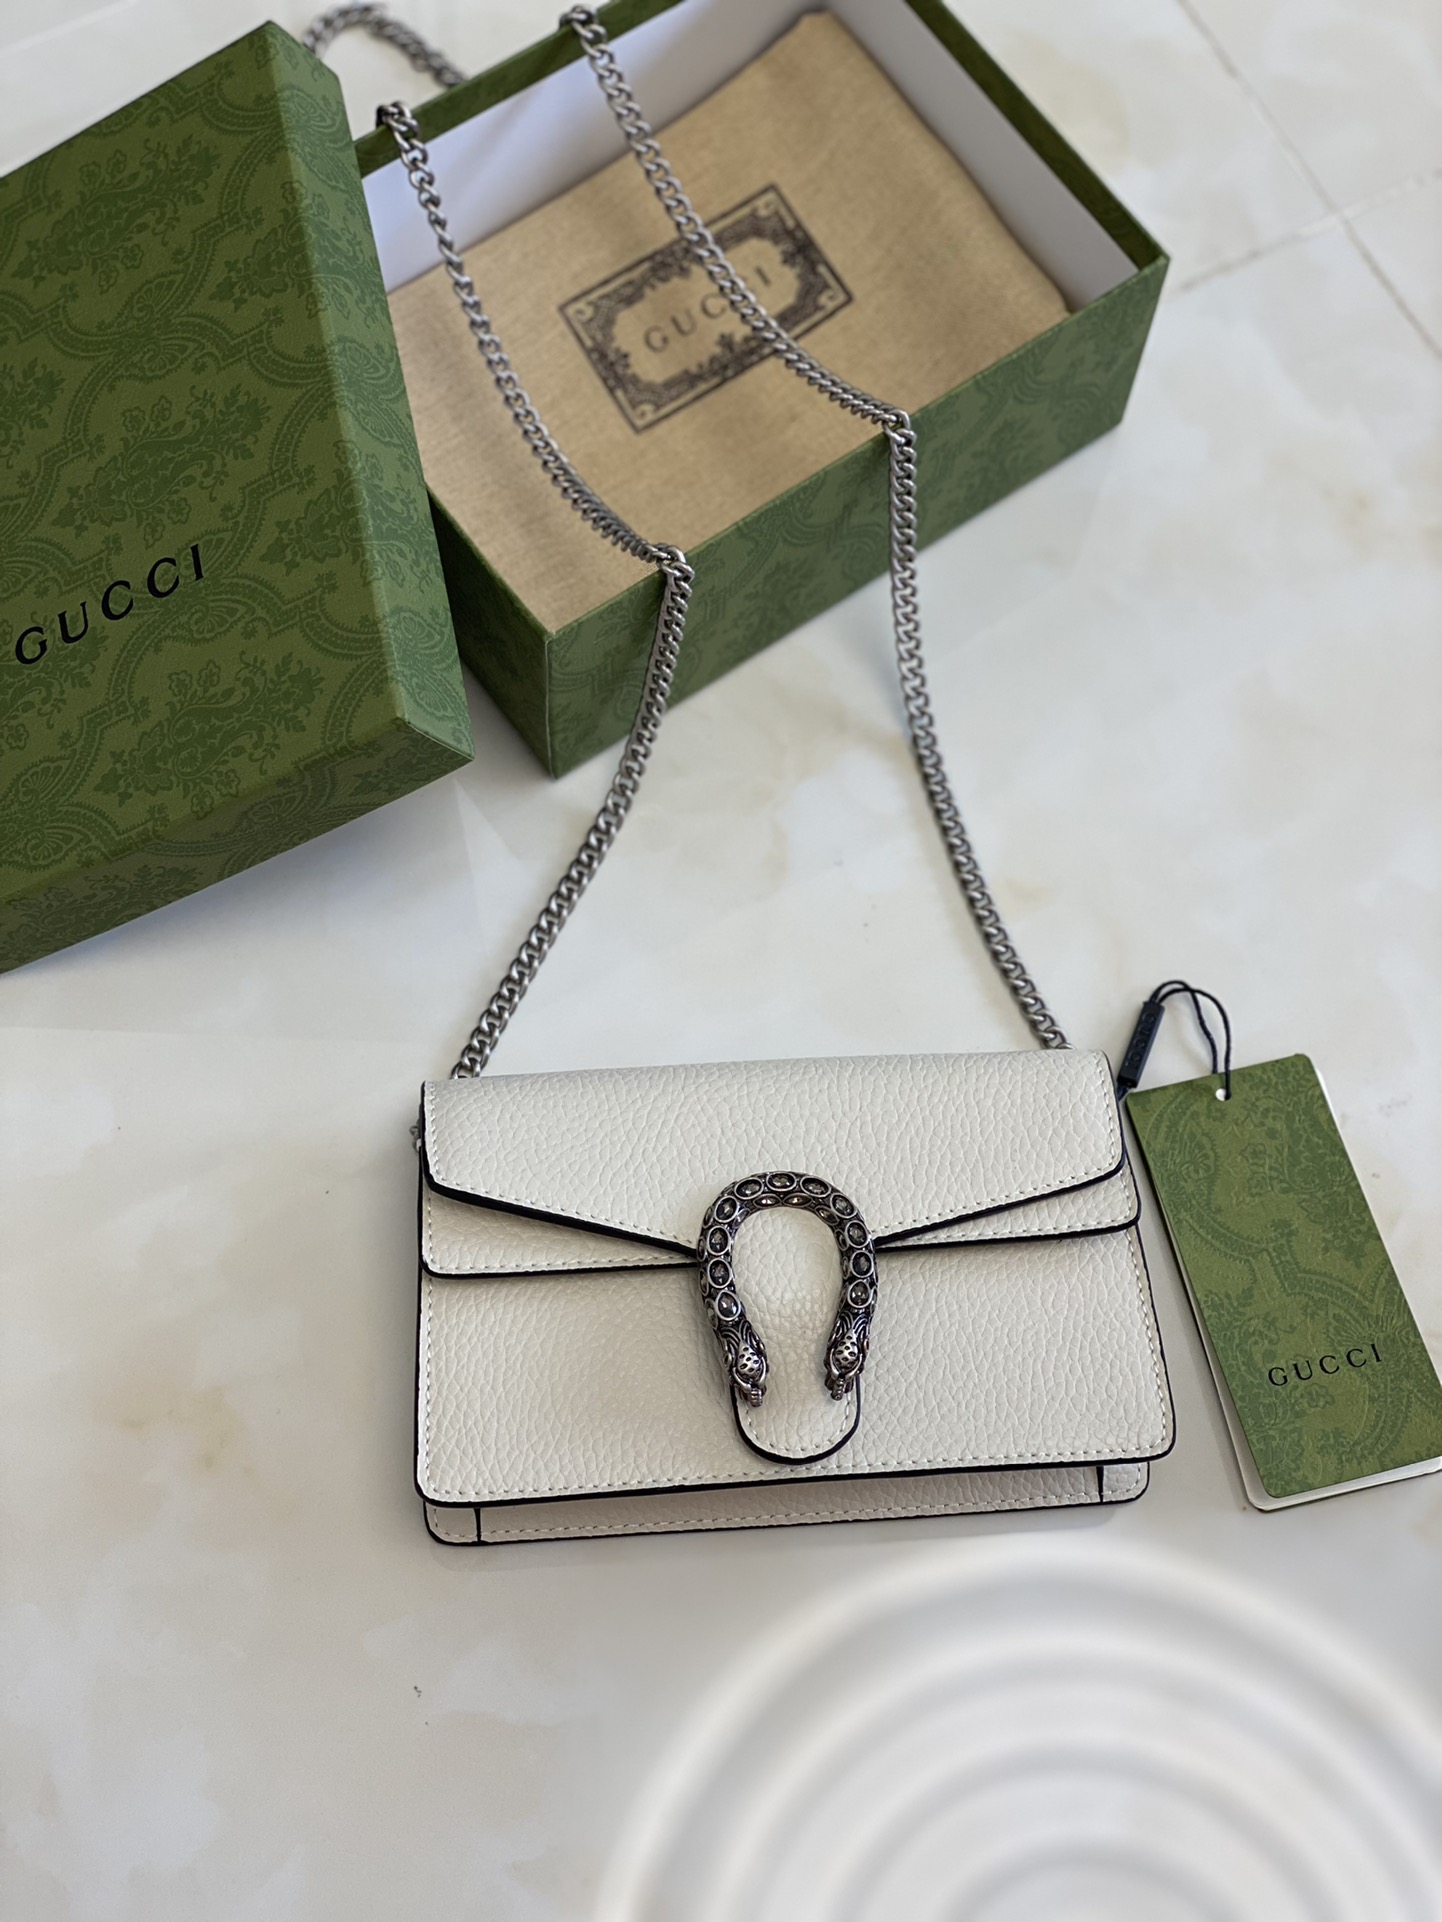 Gucci Mini Leather Chain Handbags with Key Ring Mobile Phone Bags